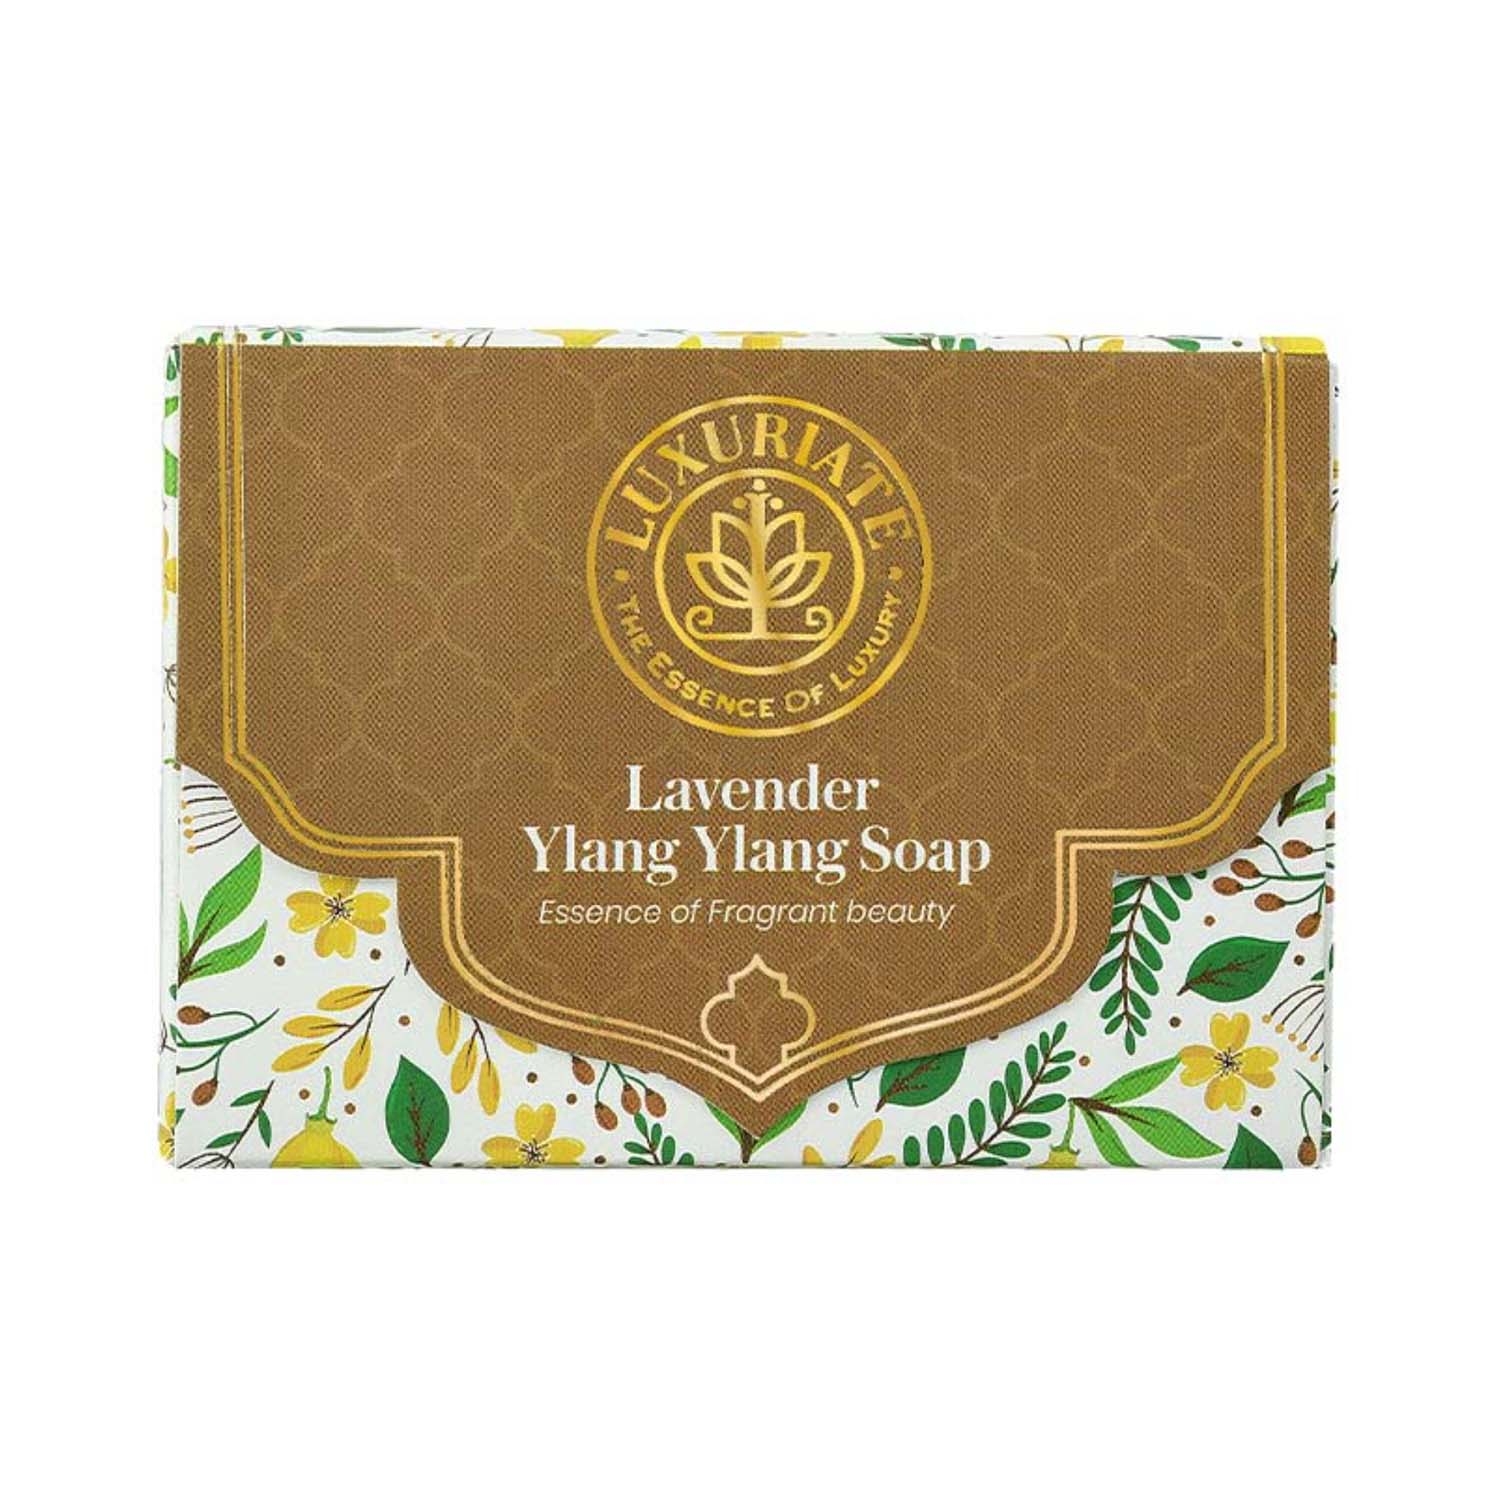 LUXURIATE | LUXURIATE Lavender Ylang Ylang Essence Of Fragrant Beauty Soap (125g)